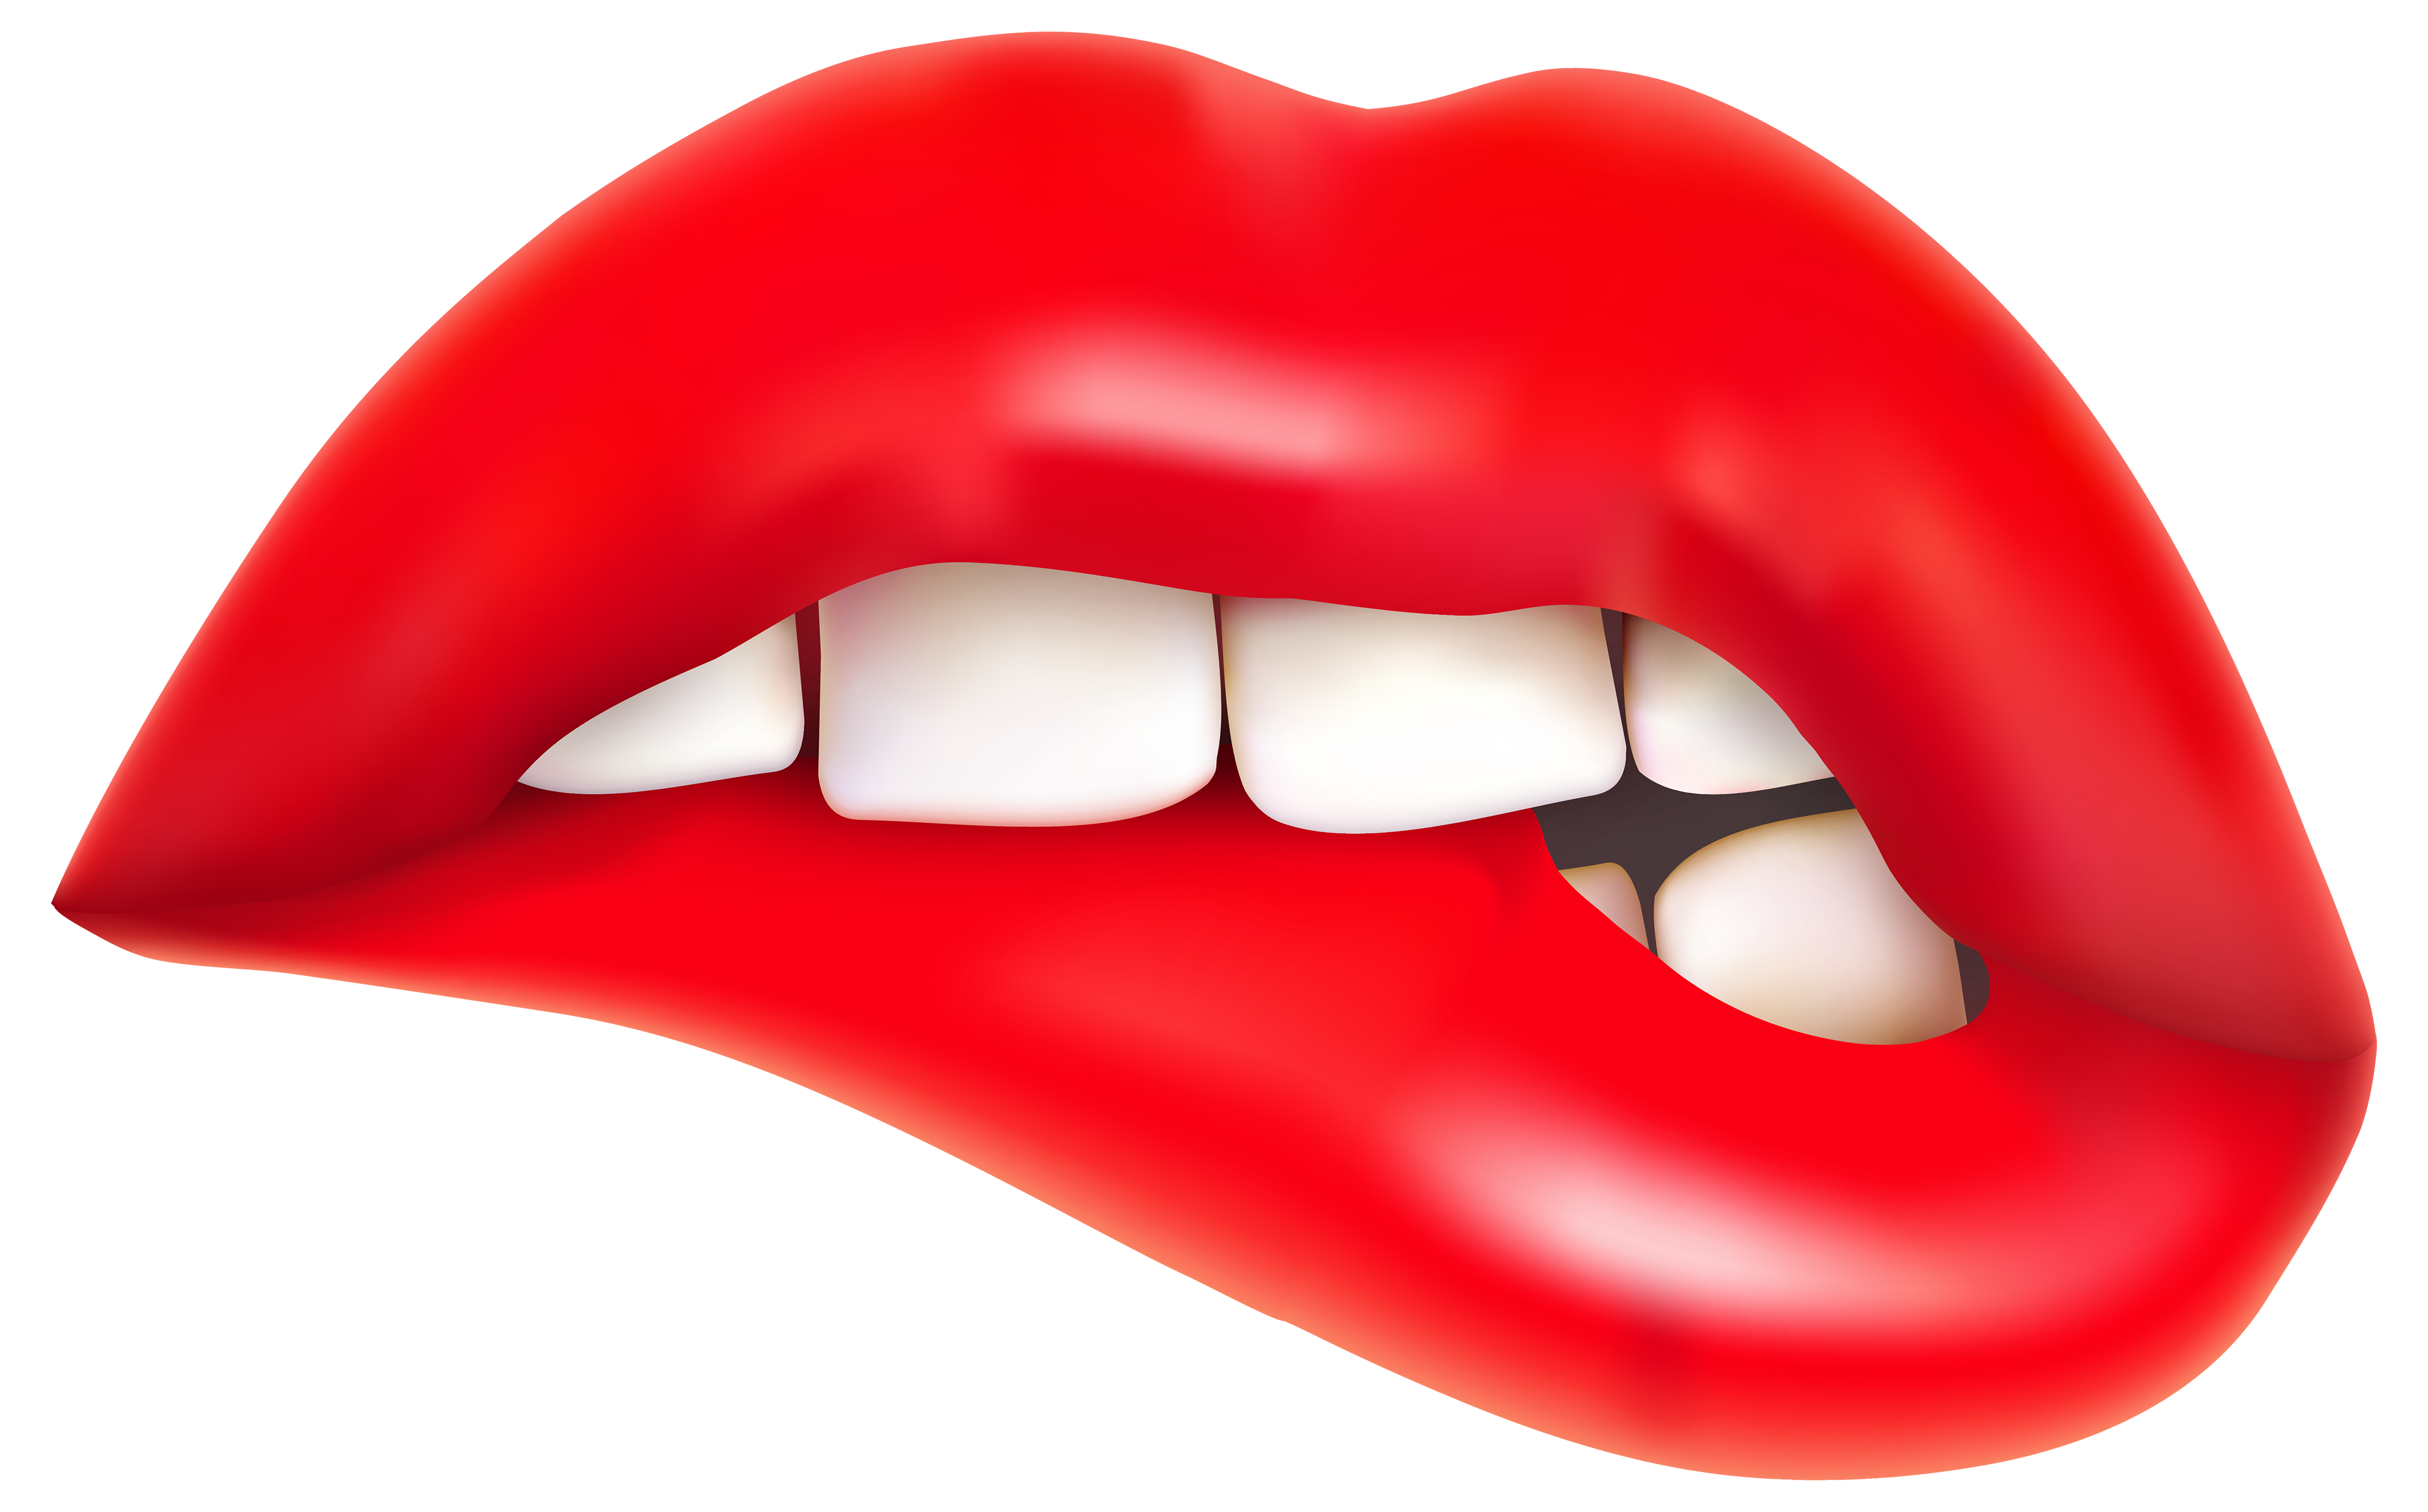 Smile Lips PNG Transparent Smile Lips.PNG Images. | PlusPNG